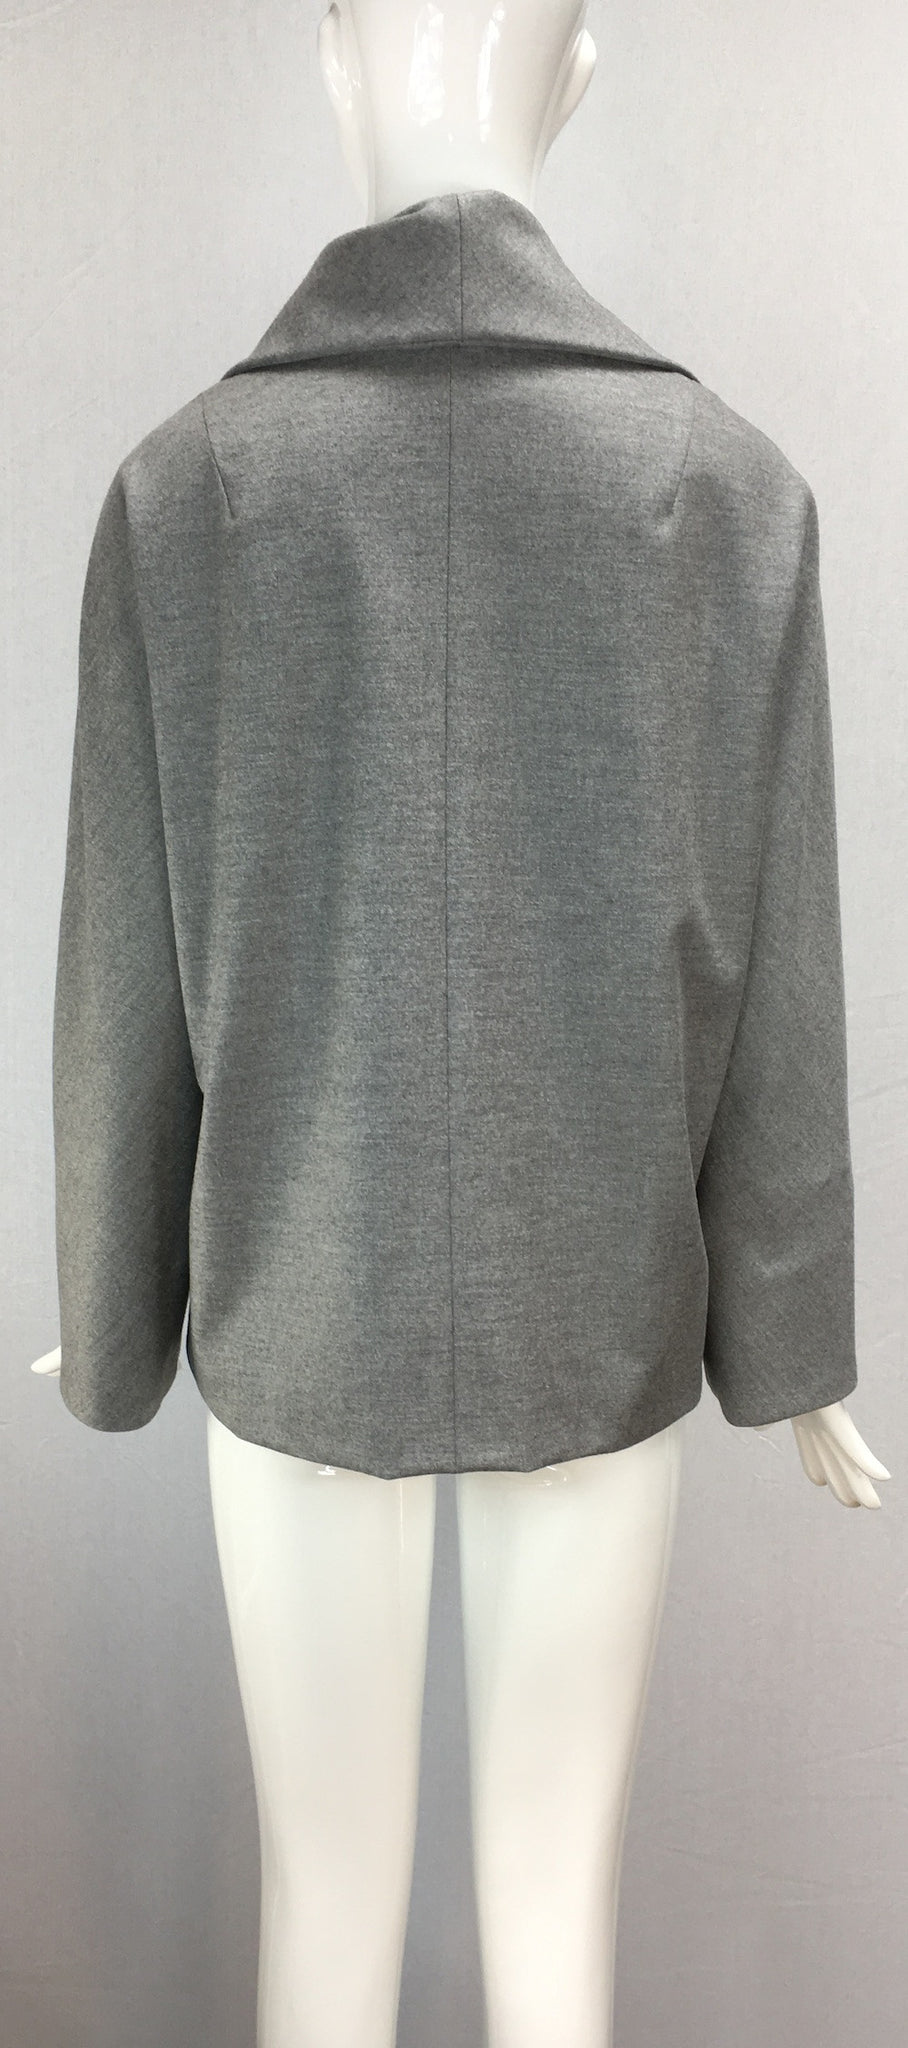 Janet Deleuse Couture Cashmere Wool Jacket, SOLD